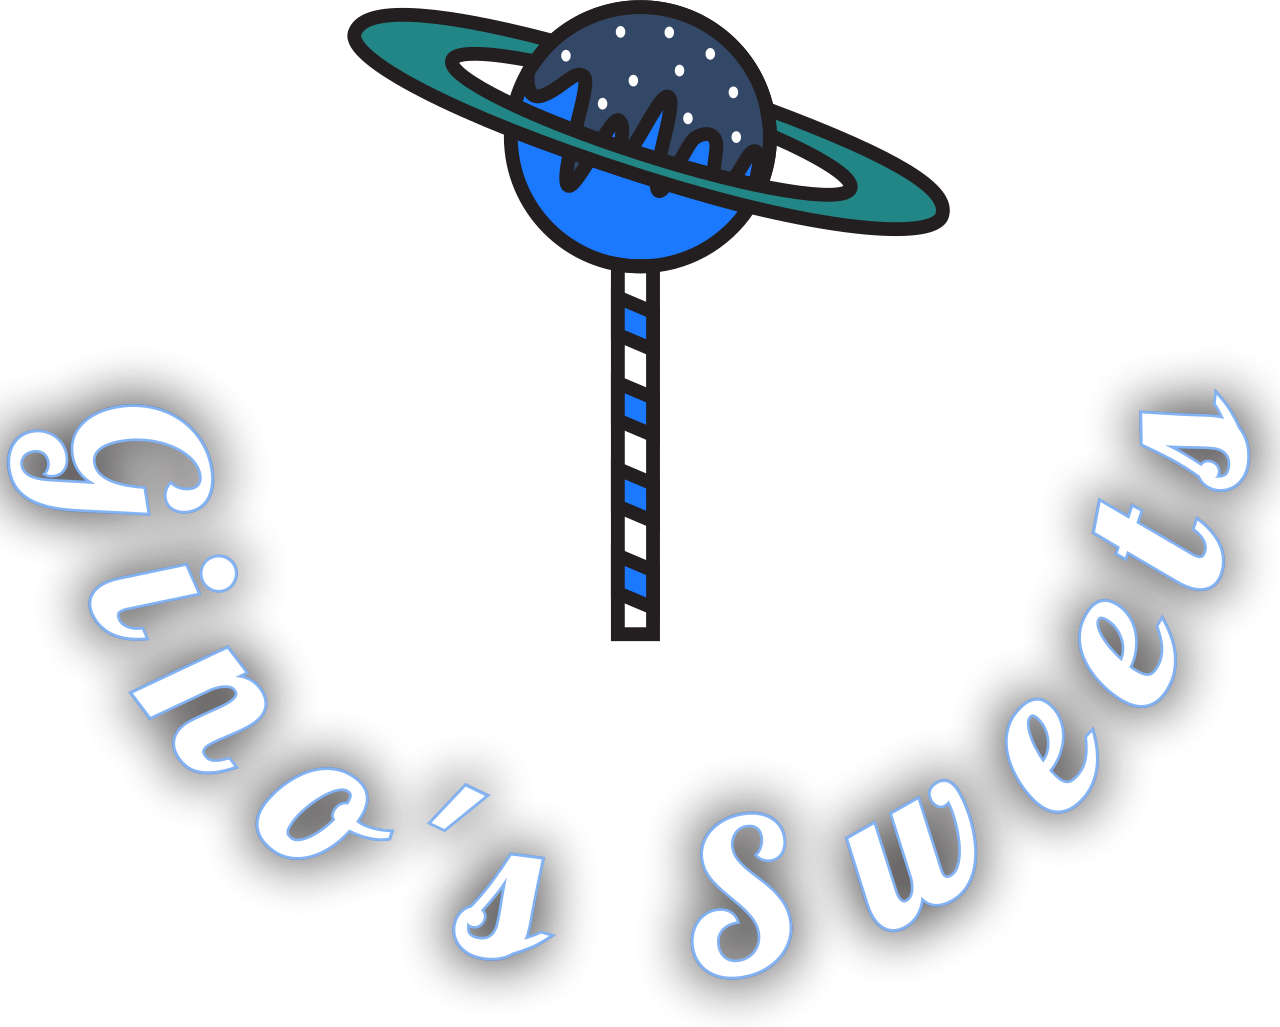 Gino's Sweets's web page